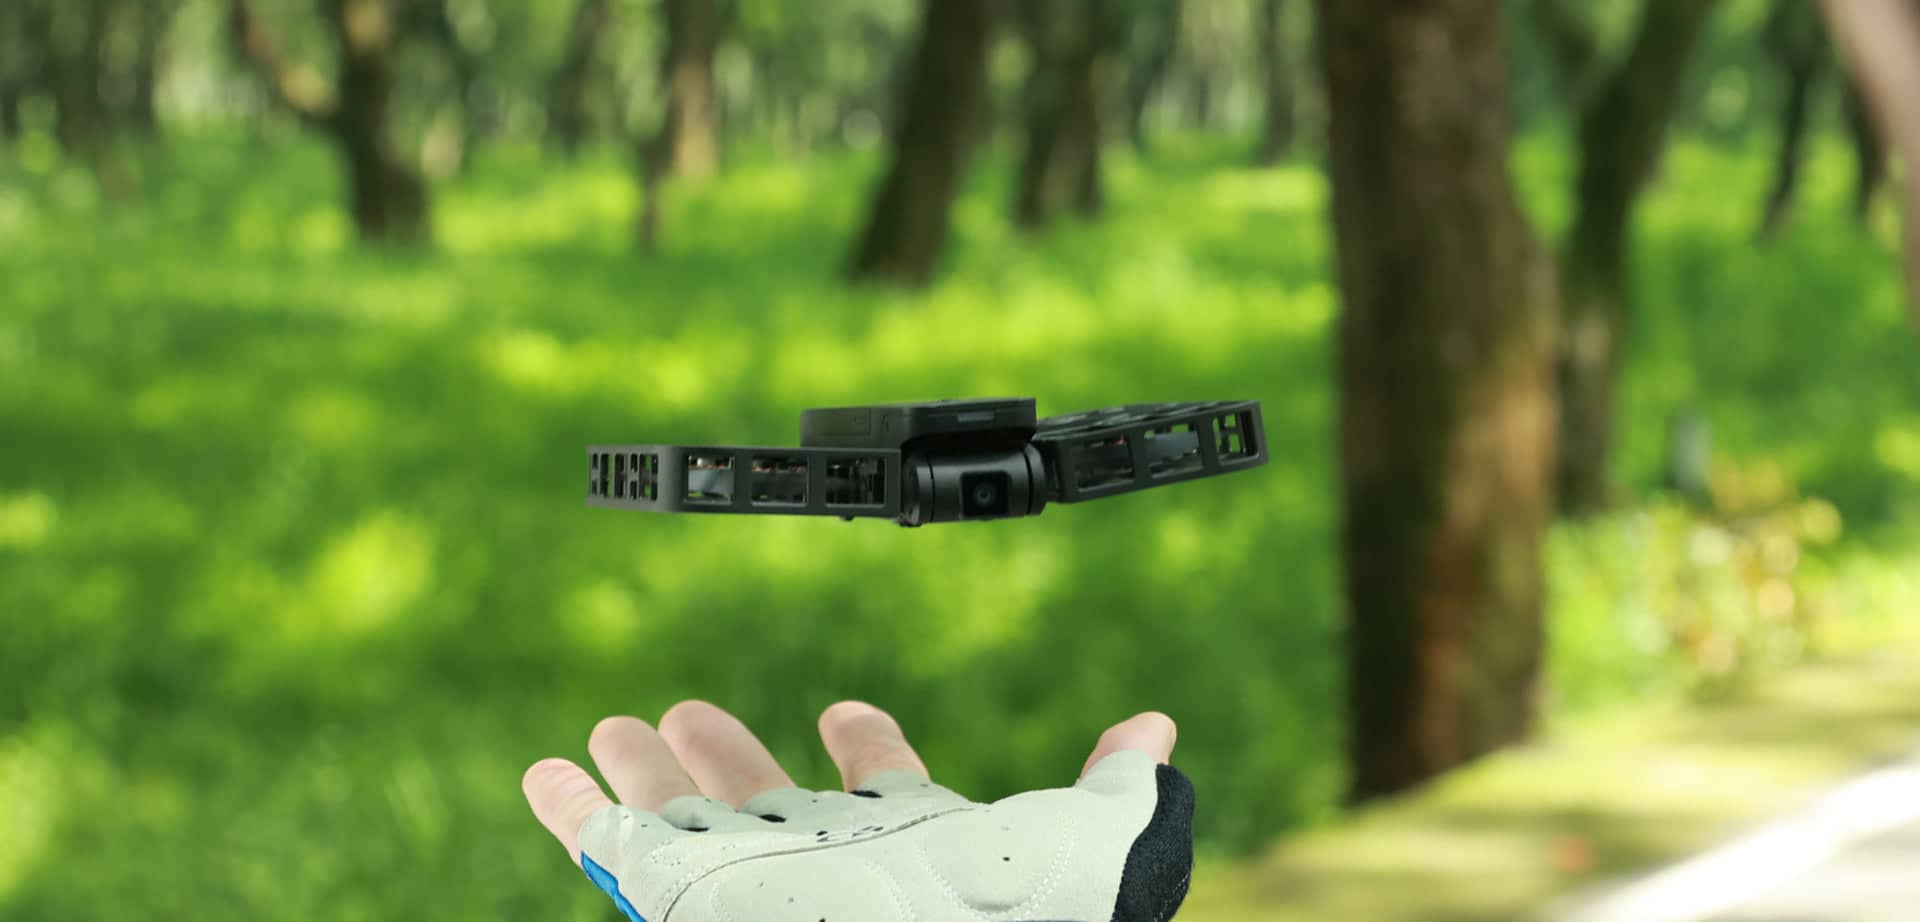 HOVERAir X1 Pocket-Sized | Self-Flying Camera | 2.7K video/1080p HDR | Triple Stabilization 13